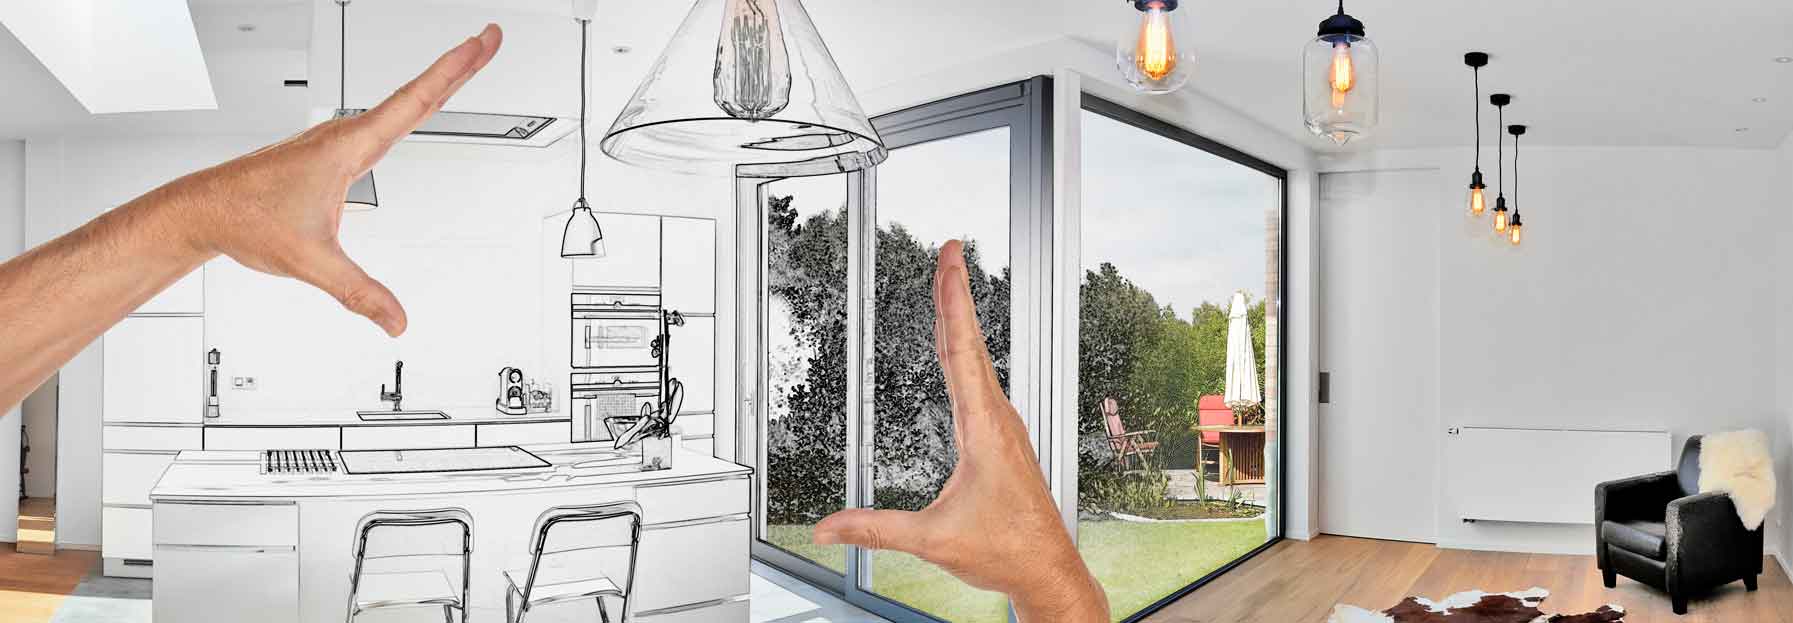 3D image of Kitchen with Hands